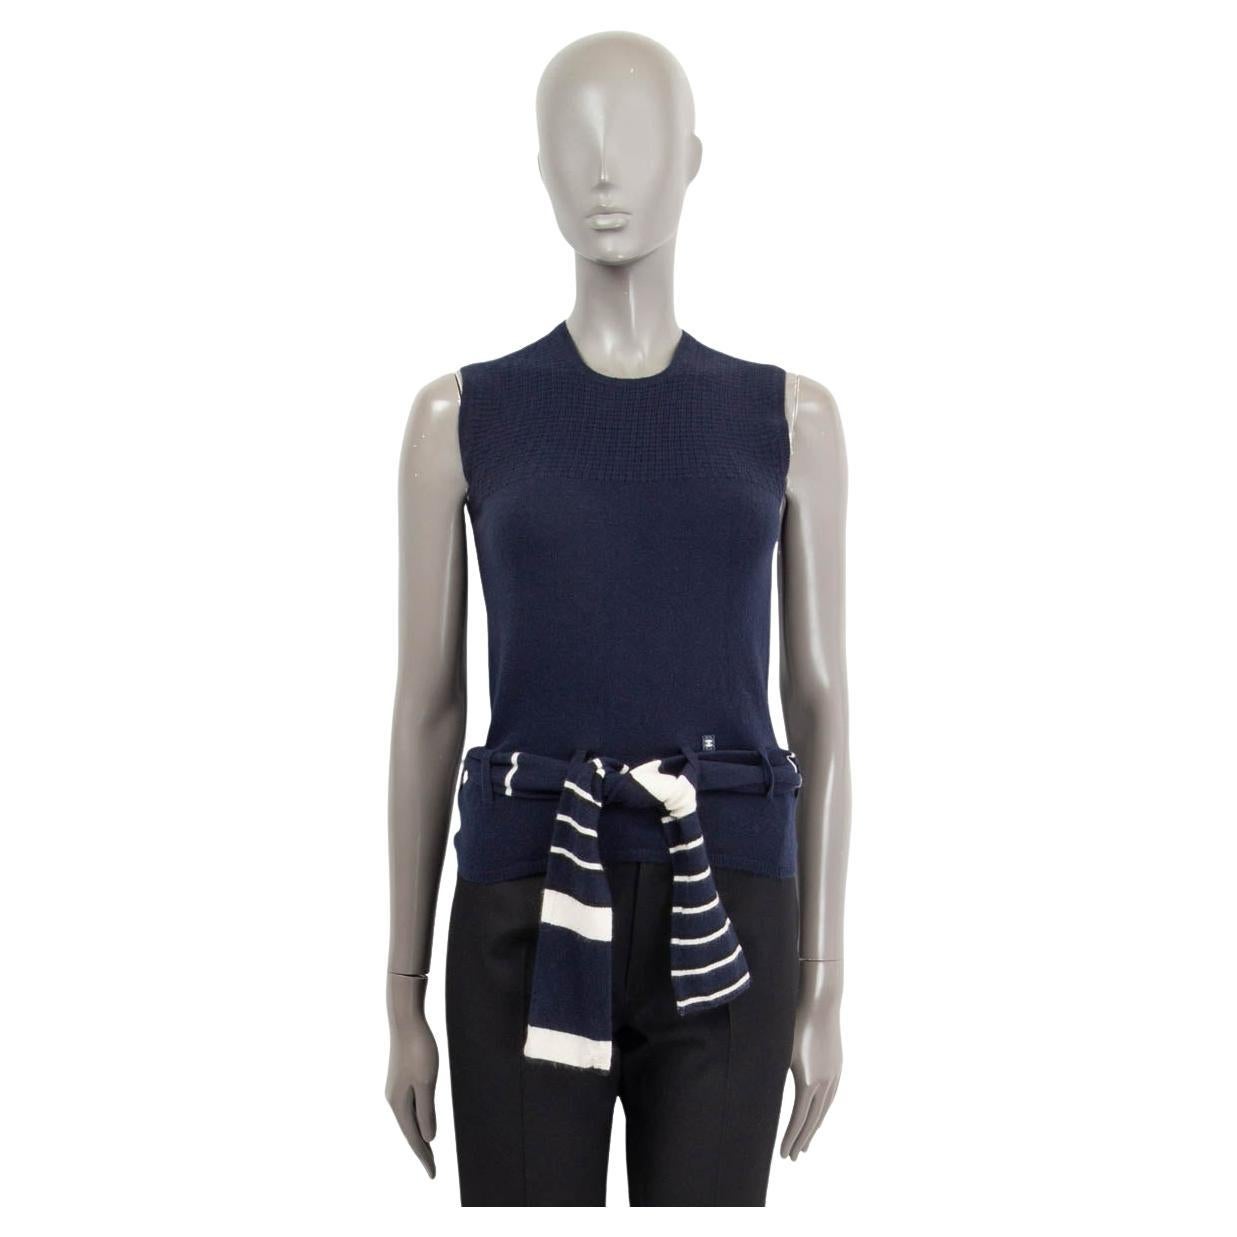 CHANEL navy blue cashmere 2002 SLEEVELESS BELTED KNIT TOP Shirt 38 S